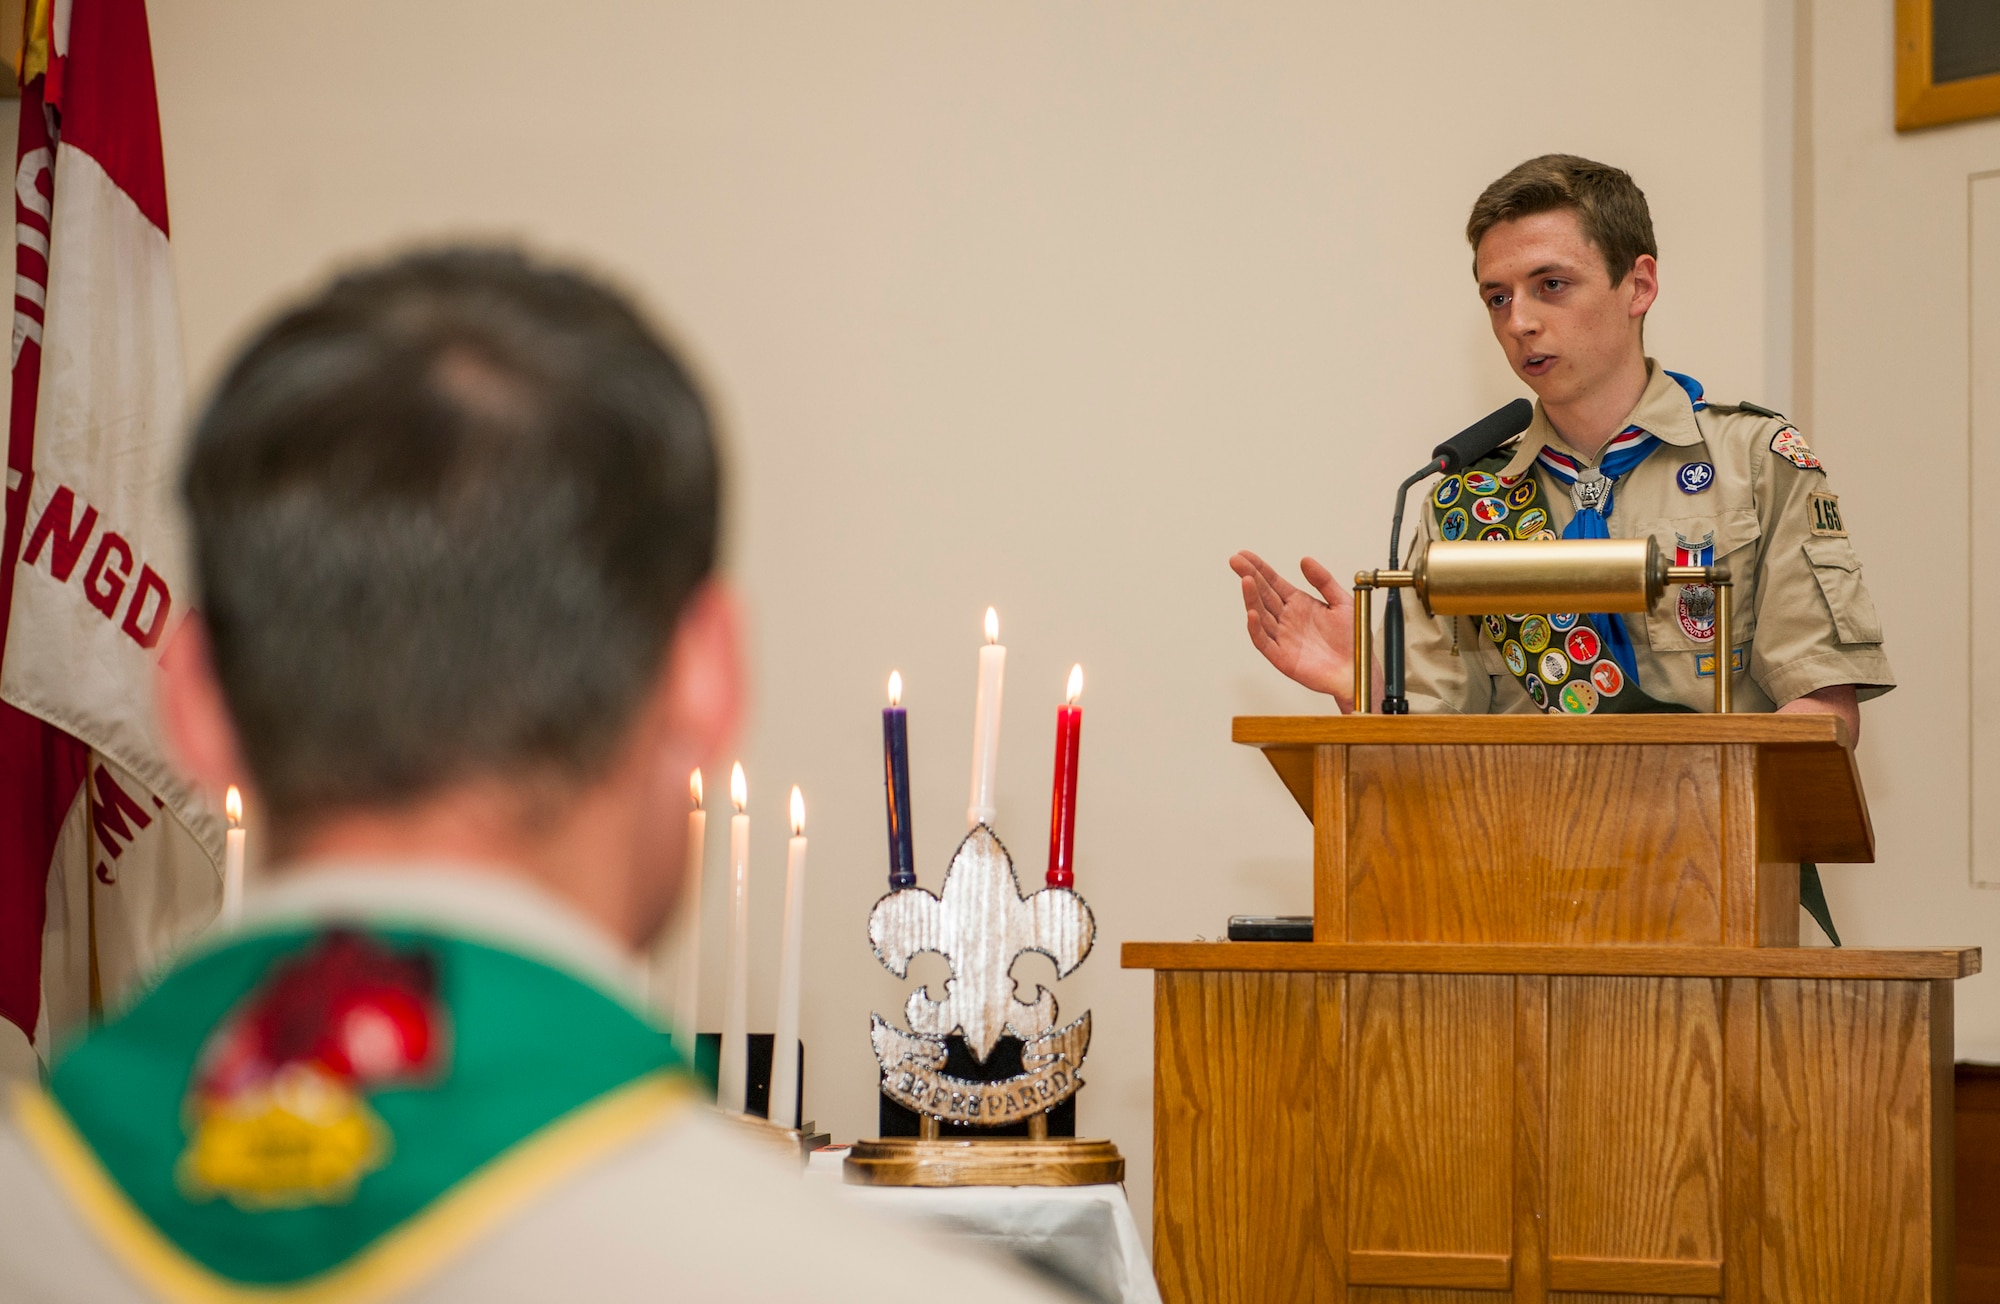 Daniel O’Connor, a Boy Scouts of America Troop 165 Eagle Scout, gives his graduation speech during a recognition ceremony in the base chapel at Spangdahlem Air Base, Germany, May 18, 2016. Scouts must earn a minimum of 21 merit badges including 13 from a required list before becoming an Eagle Scout. (U.S. Air Force photo by Airman 1st Class Timothy Kim/Released)